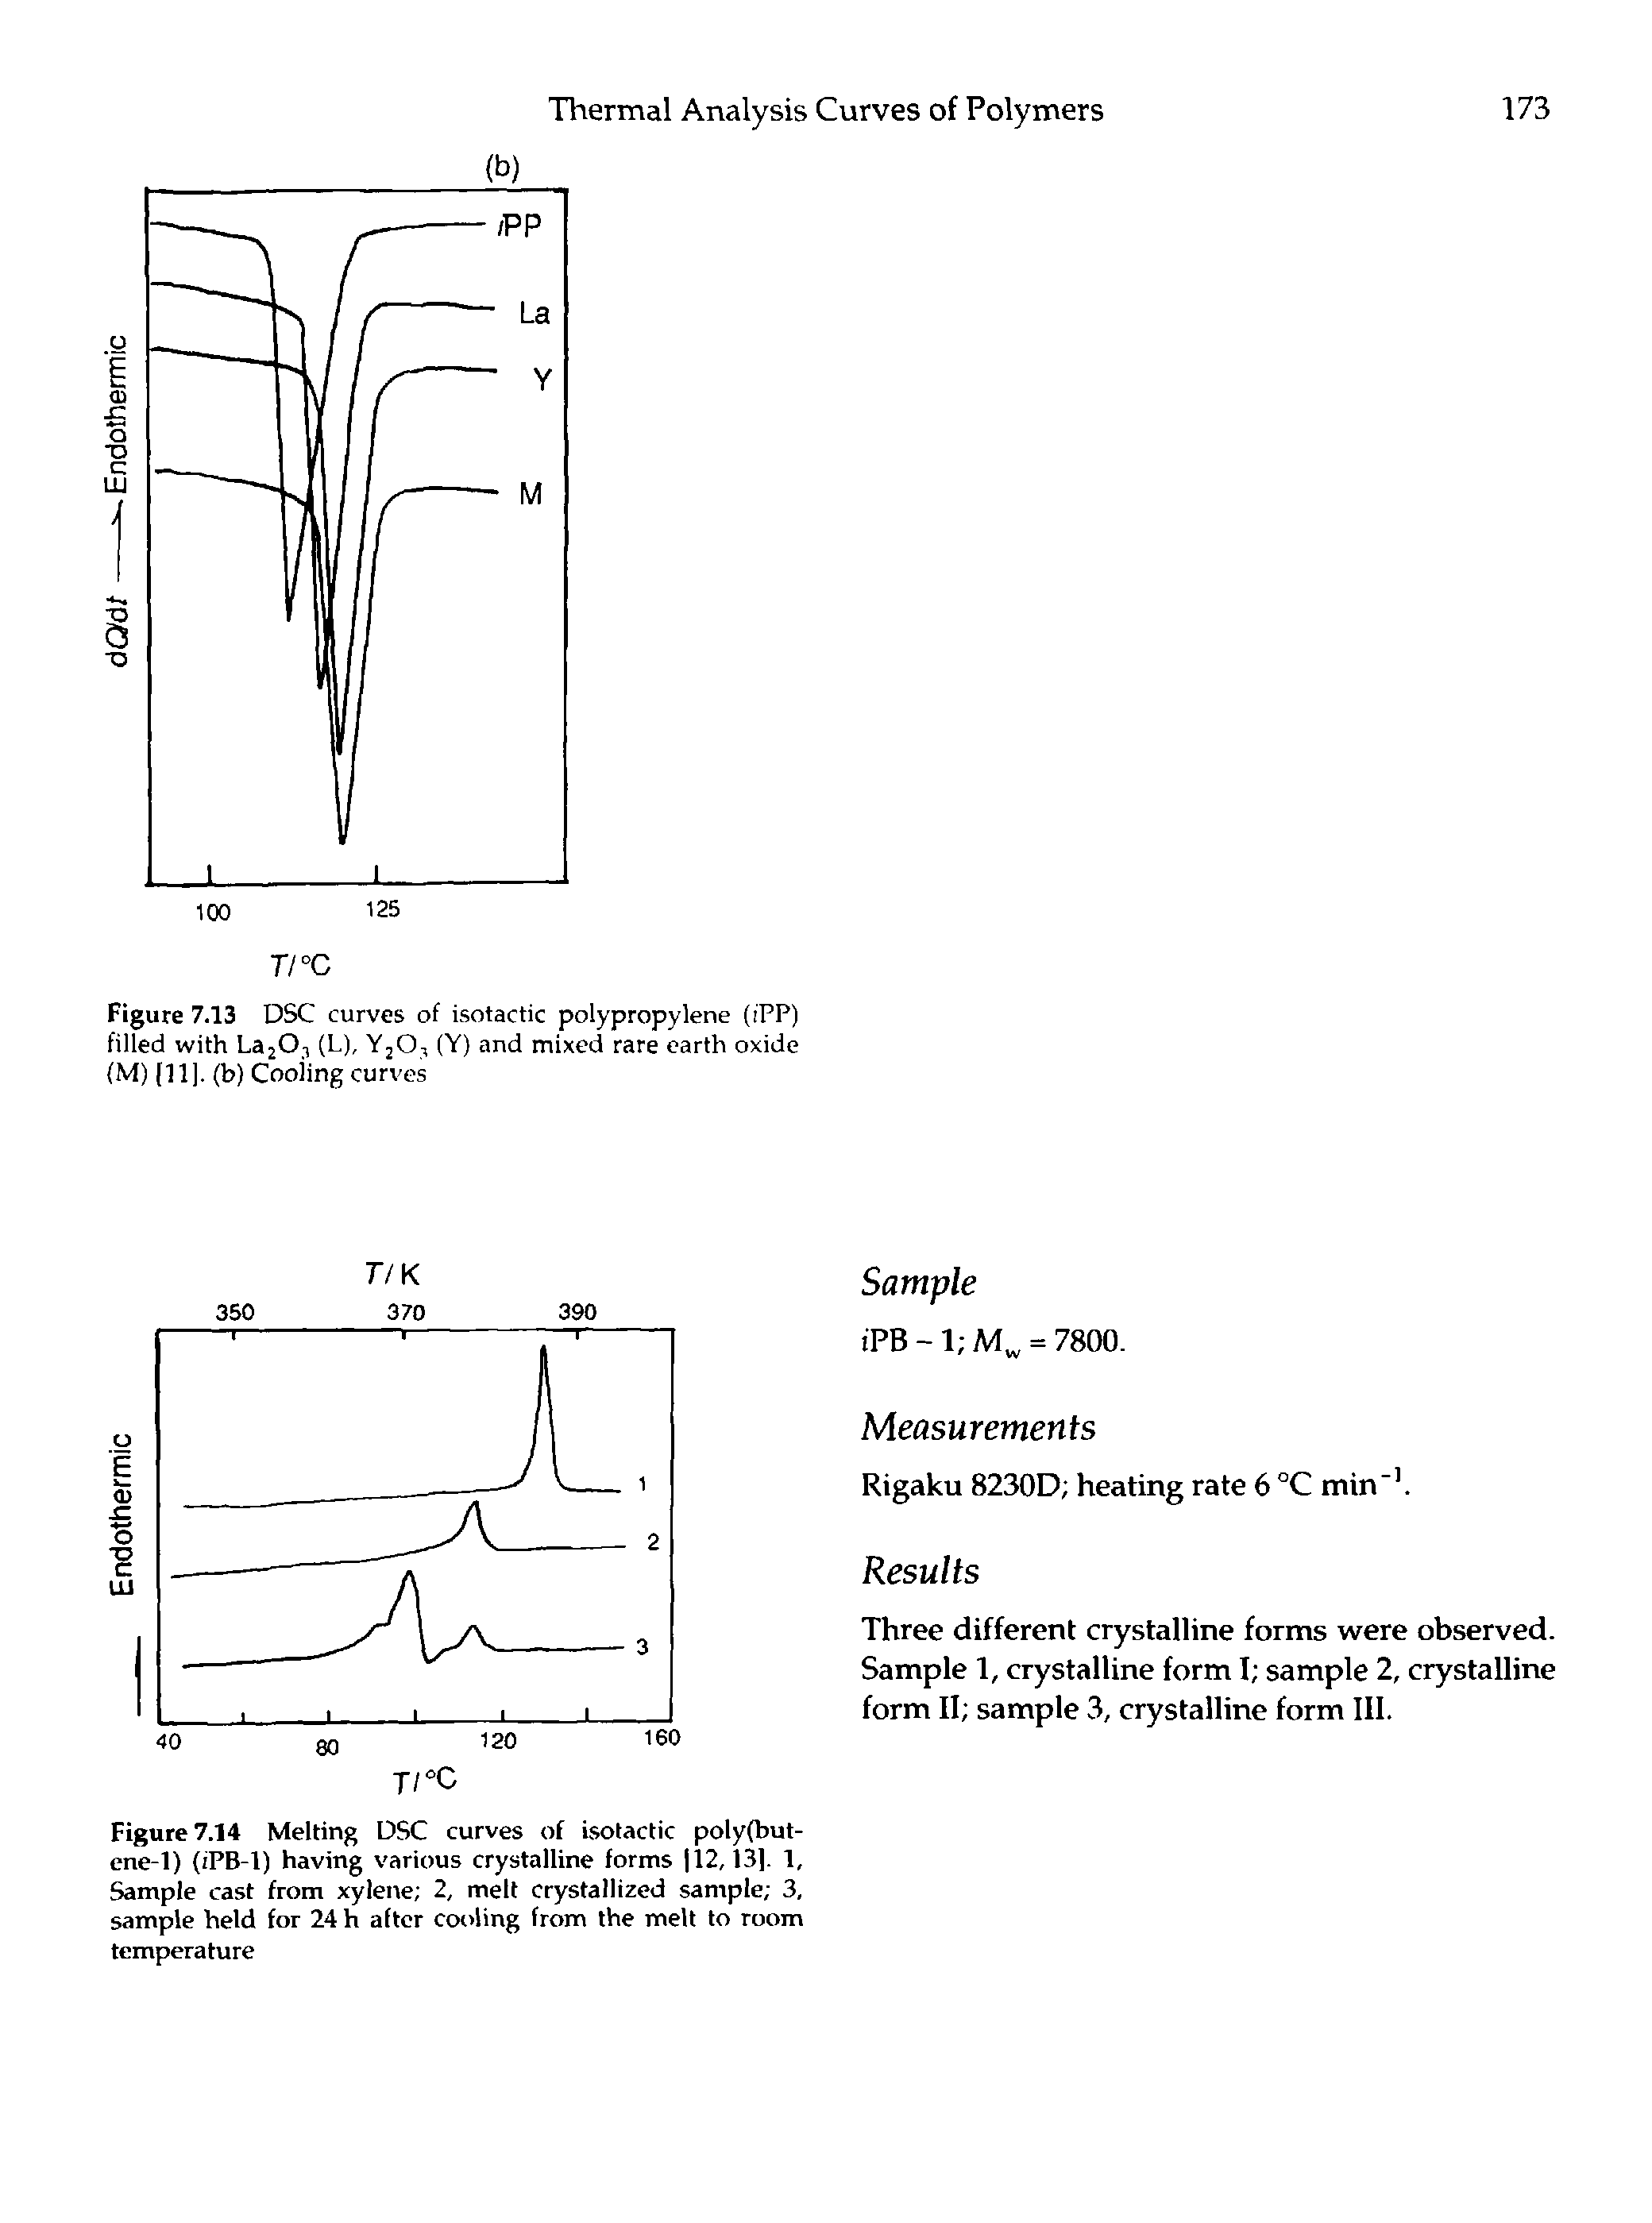 Figure 7.14 Melting DSC curves of isofactic polyfbut-ene-1) (iPB-1) having various crystalline forms 12,13]. 1, Sample cast from xylene 2, melt crystallized sample 3, sample held for 24 h after cooling from the melt to room temperature...